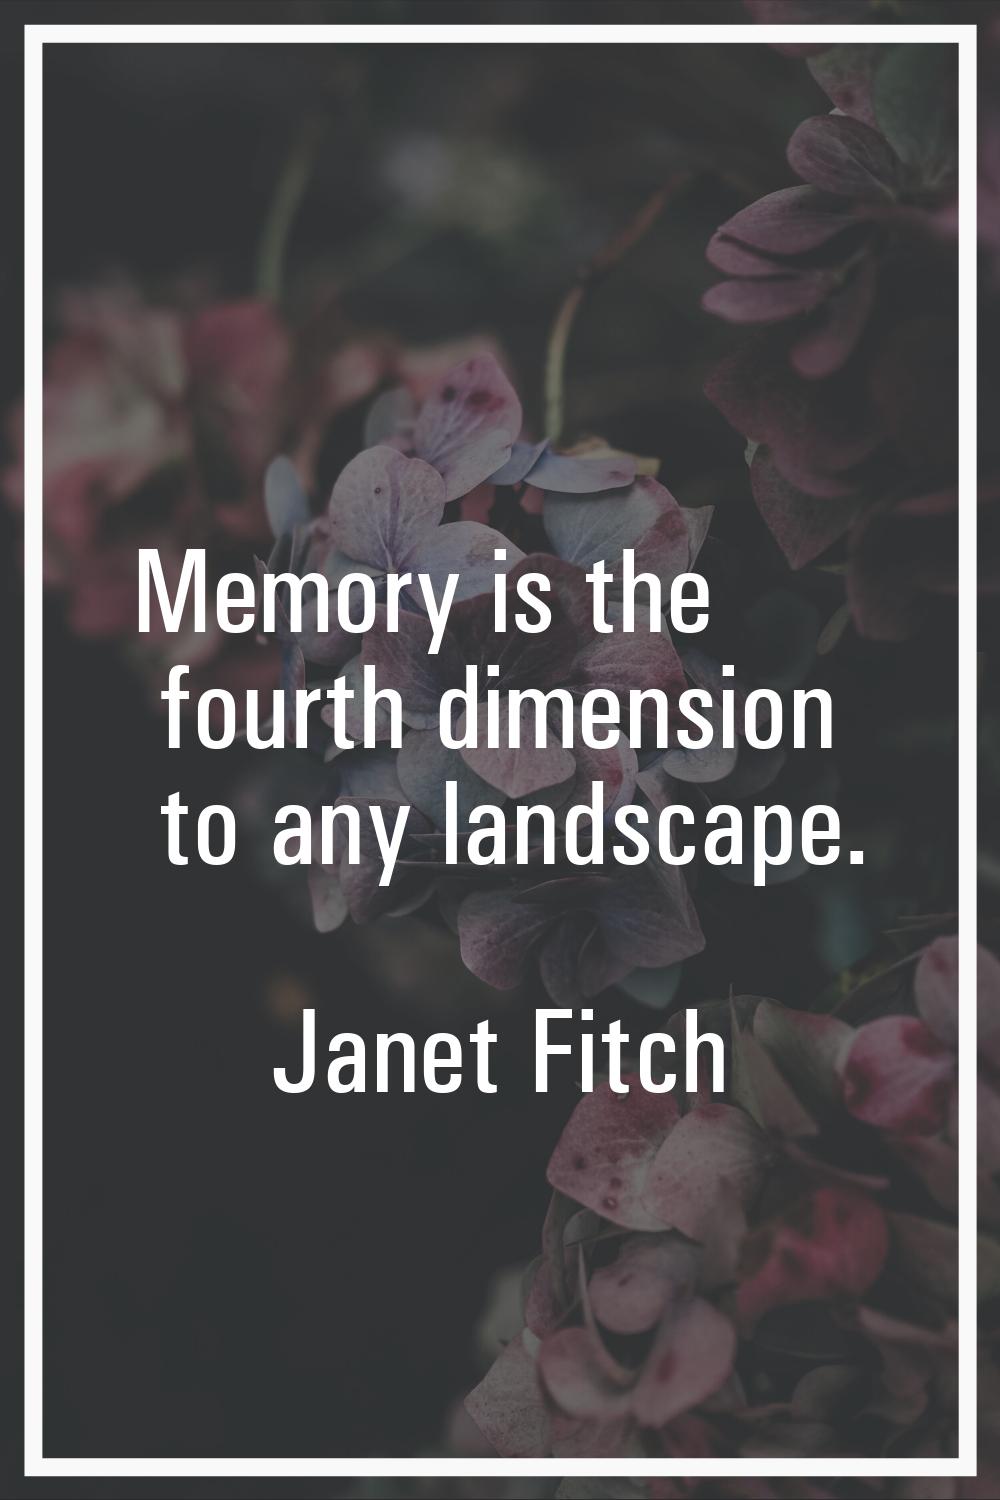 Memory is the fourth dimension to any landscape.